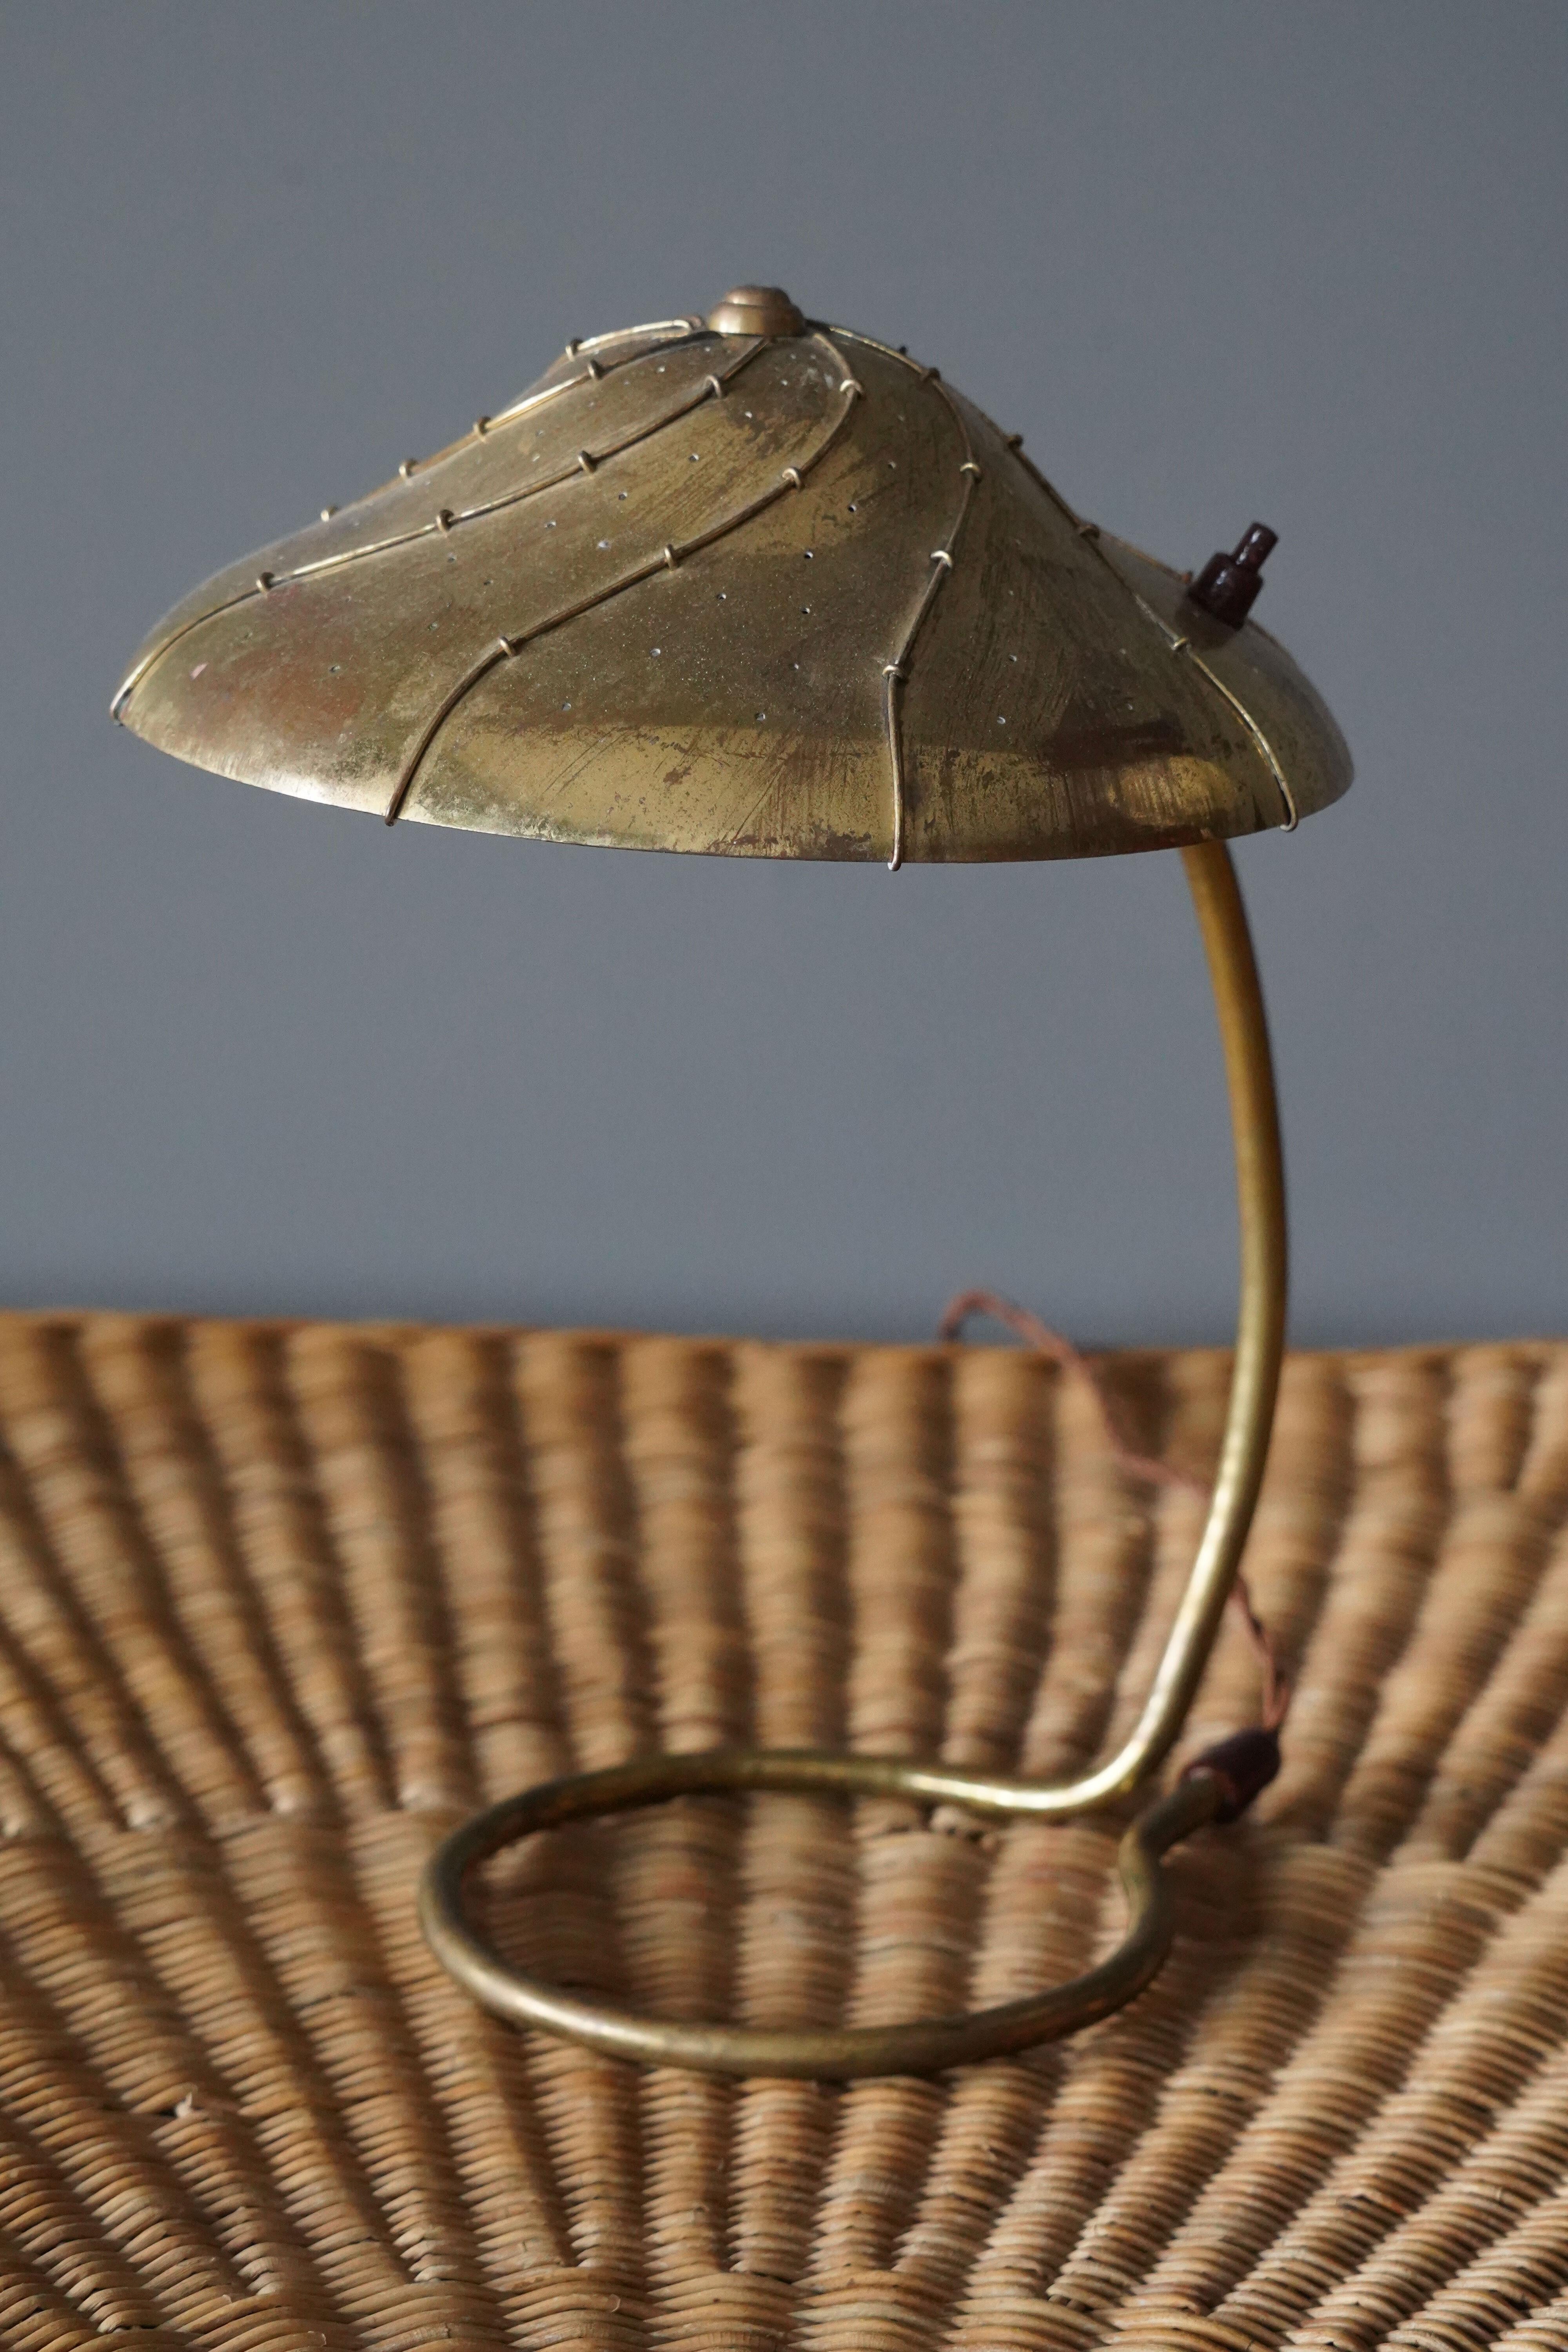 A table lamp, designed and produced in Finland, 1930s. In brass. 

Other designers of the period include Paavo Tynell, Lisa Johansson-Pape, Alvar Aalto, Tapio Wirkkala, Ilmari Tapiovaara.